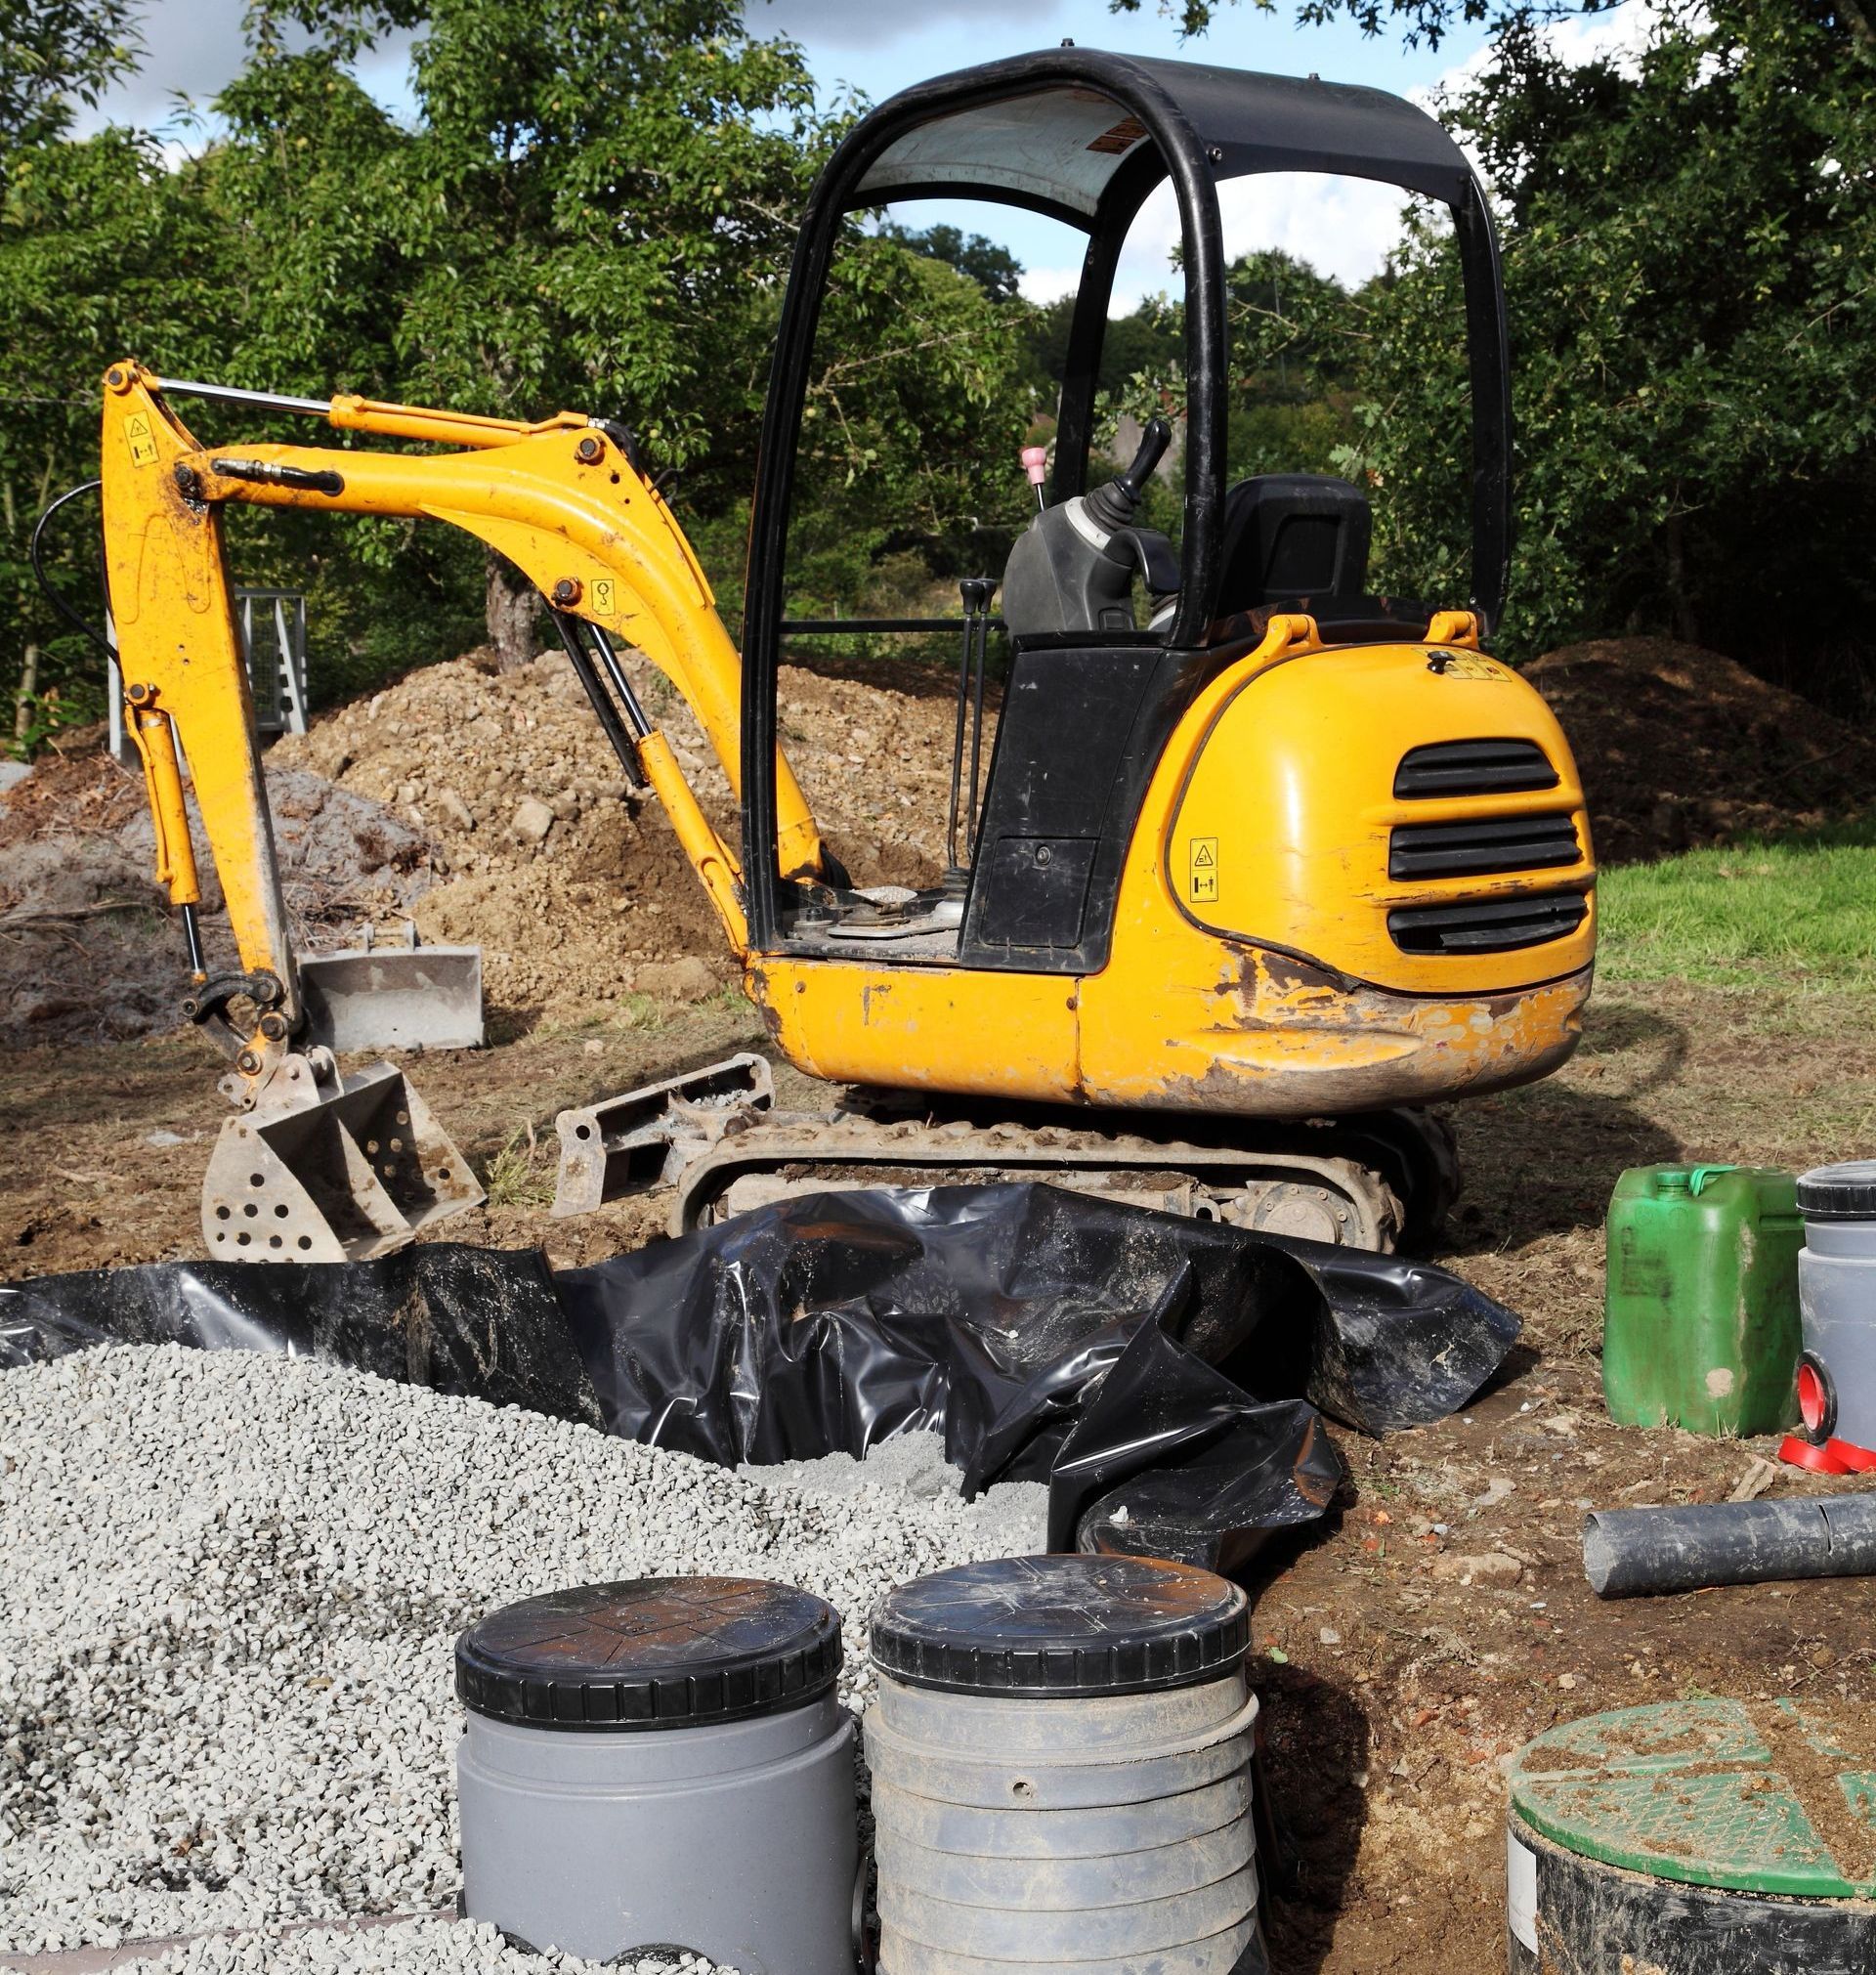 Mini digger installing a sand and gravel filter for sewage.